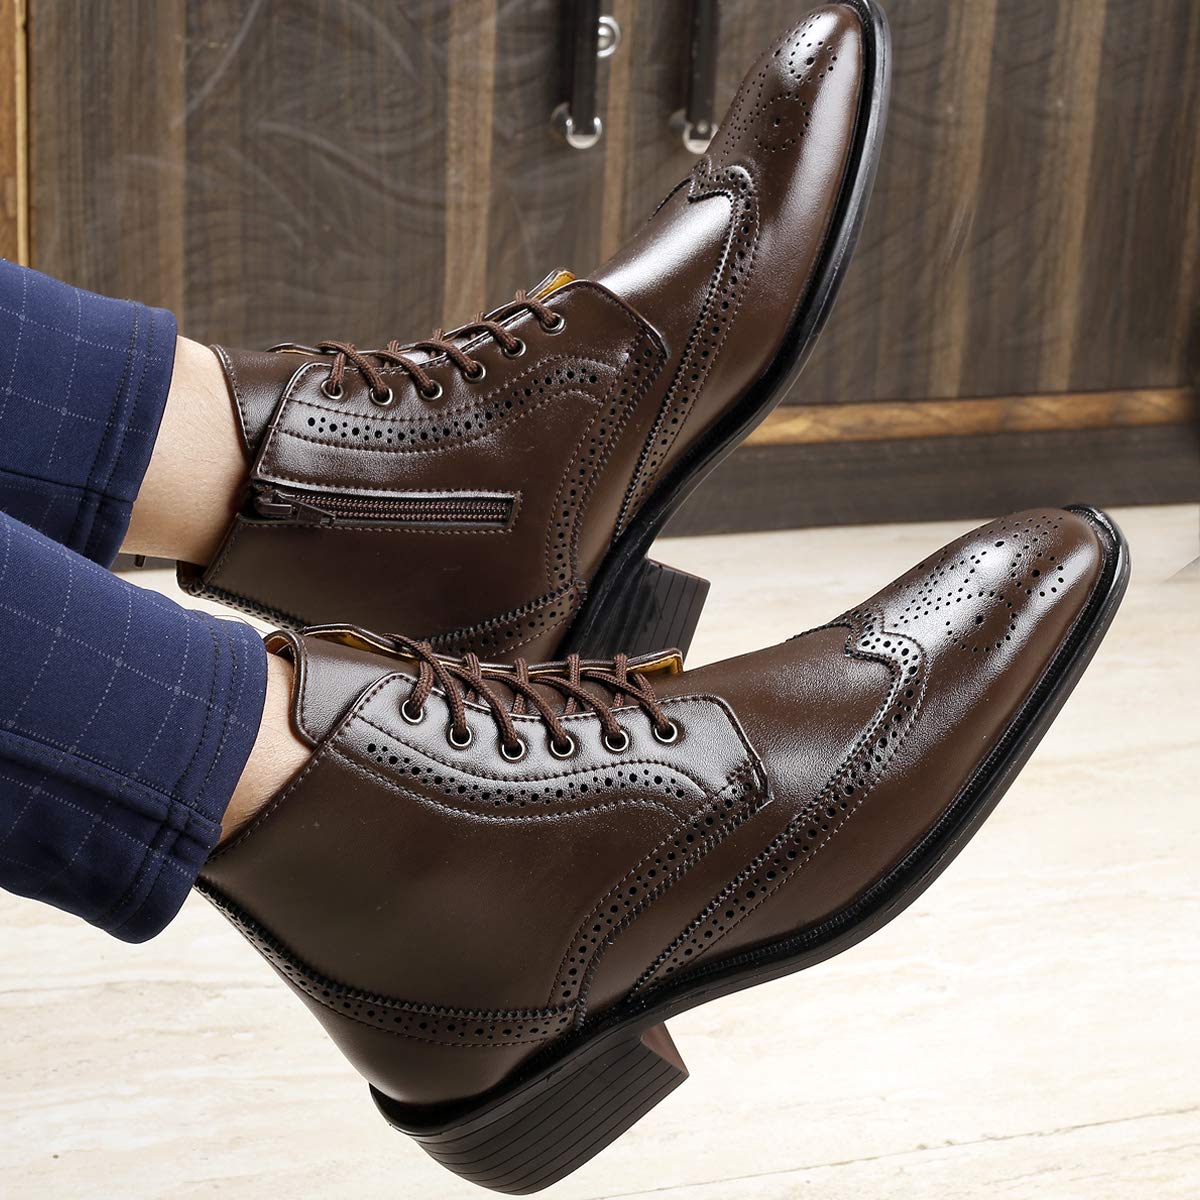 High Ankle Height Increasing Brown Casual And Outdoor Boot For Men-Unique and Classy